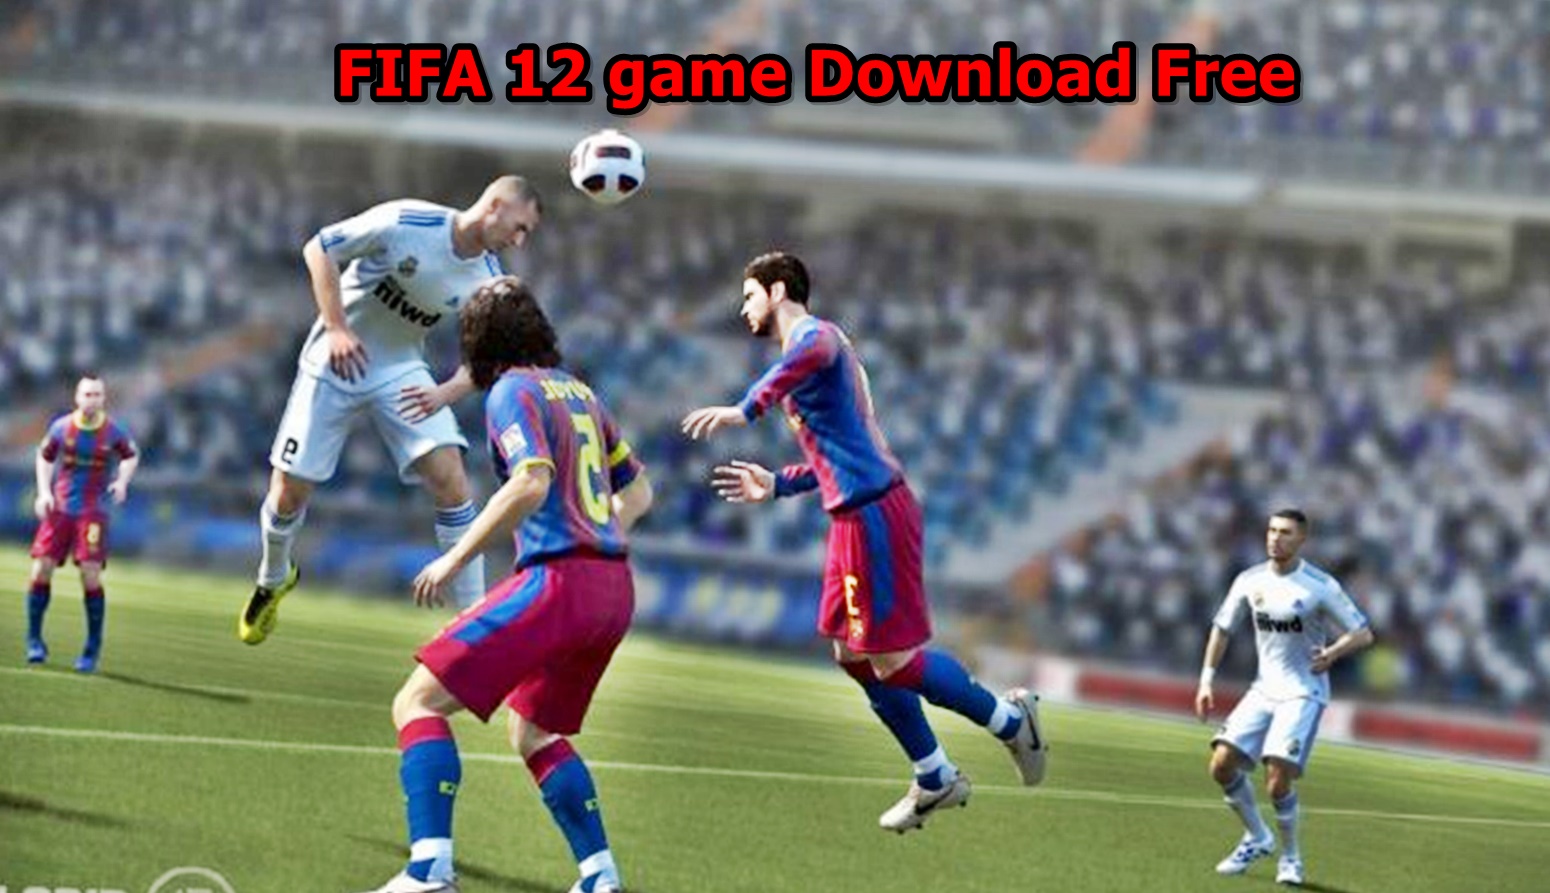 download fifa 2011 game for free